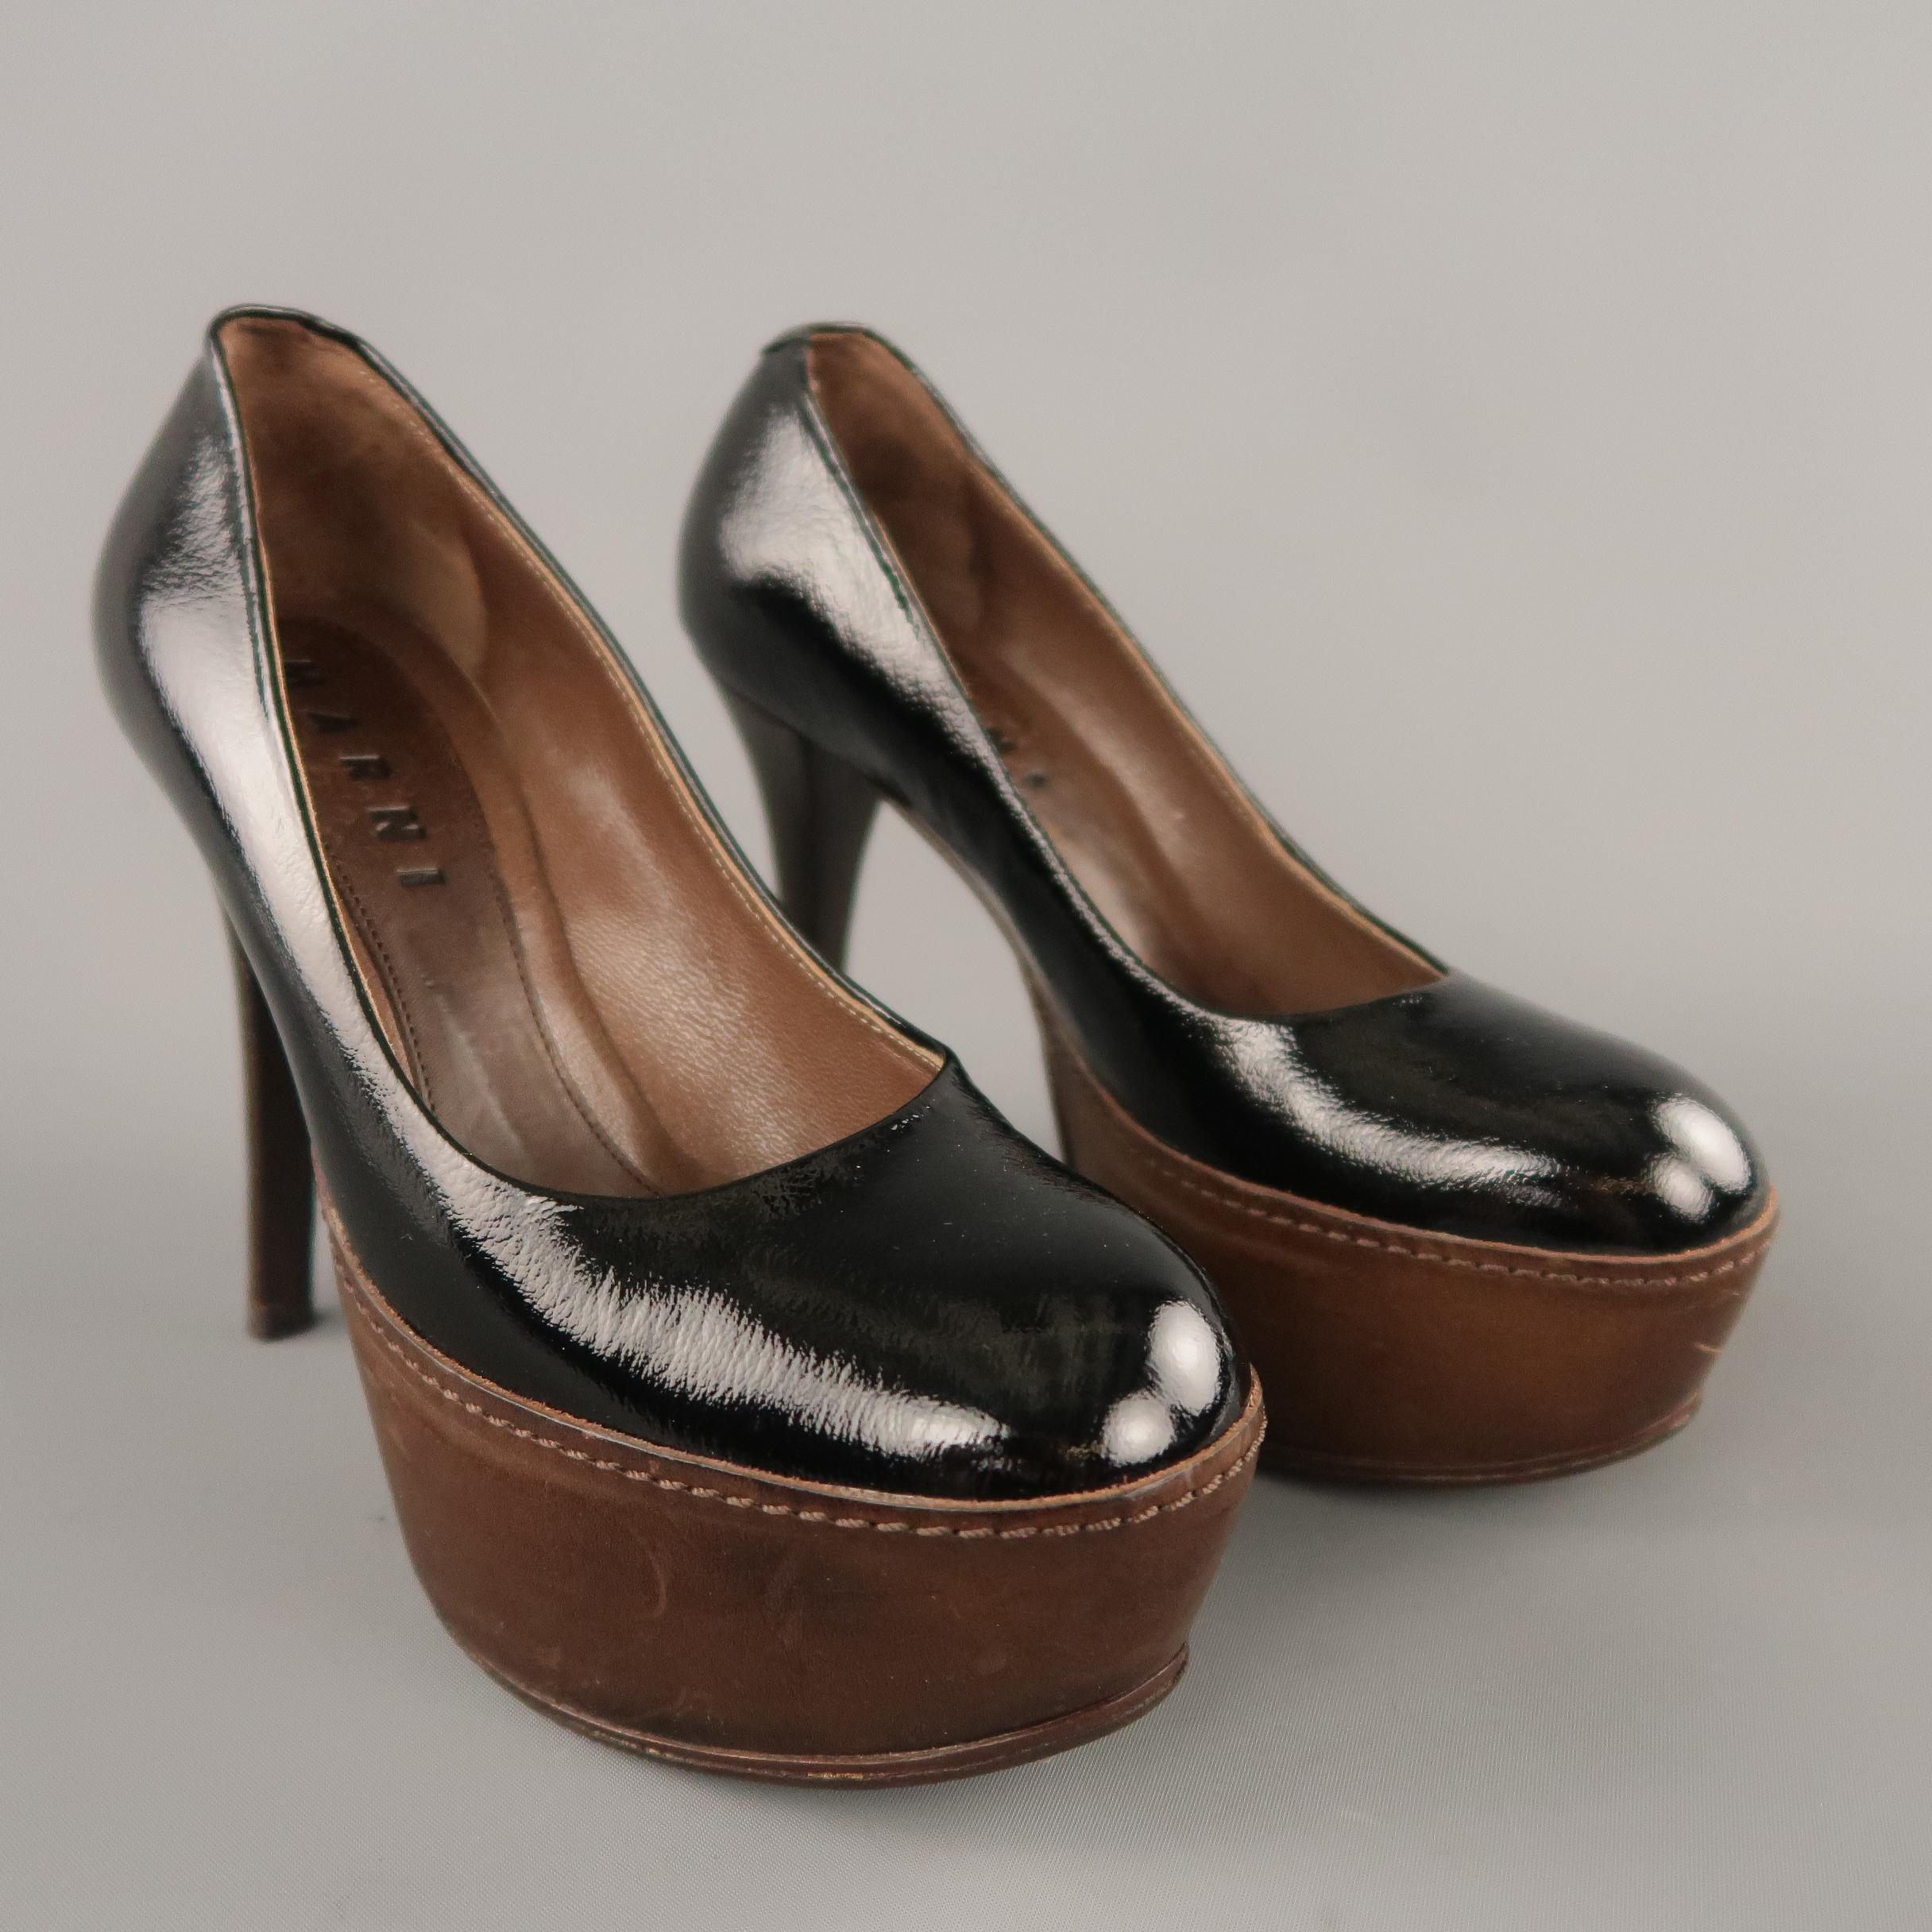 MARNI pumps come in black patent leather with a round toe, brown leather covered platform, and stacked stiletto heel. Made in Italy.

Original retail price $695.00
 
Very Good Pre-Owned Condition.
Marked: IT 35.5
 
Measurements:
 
Heel: 4.5